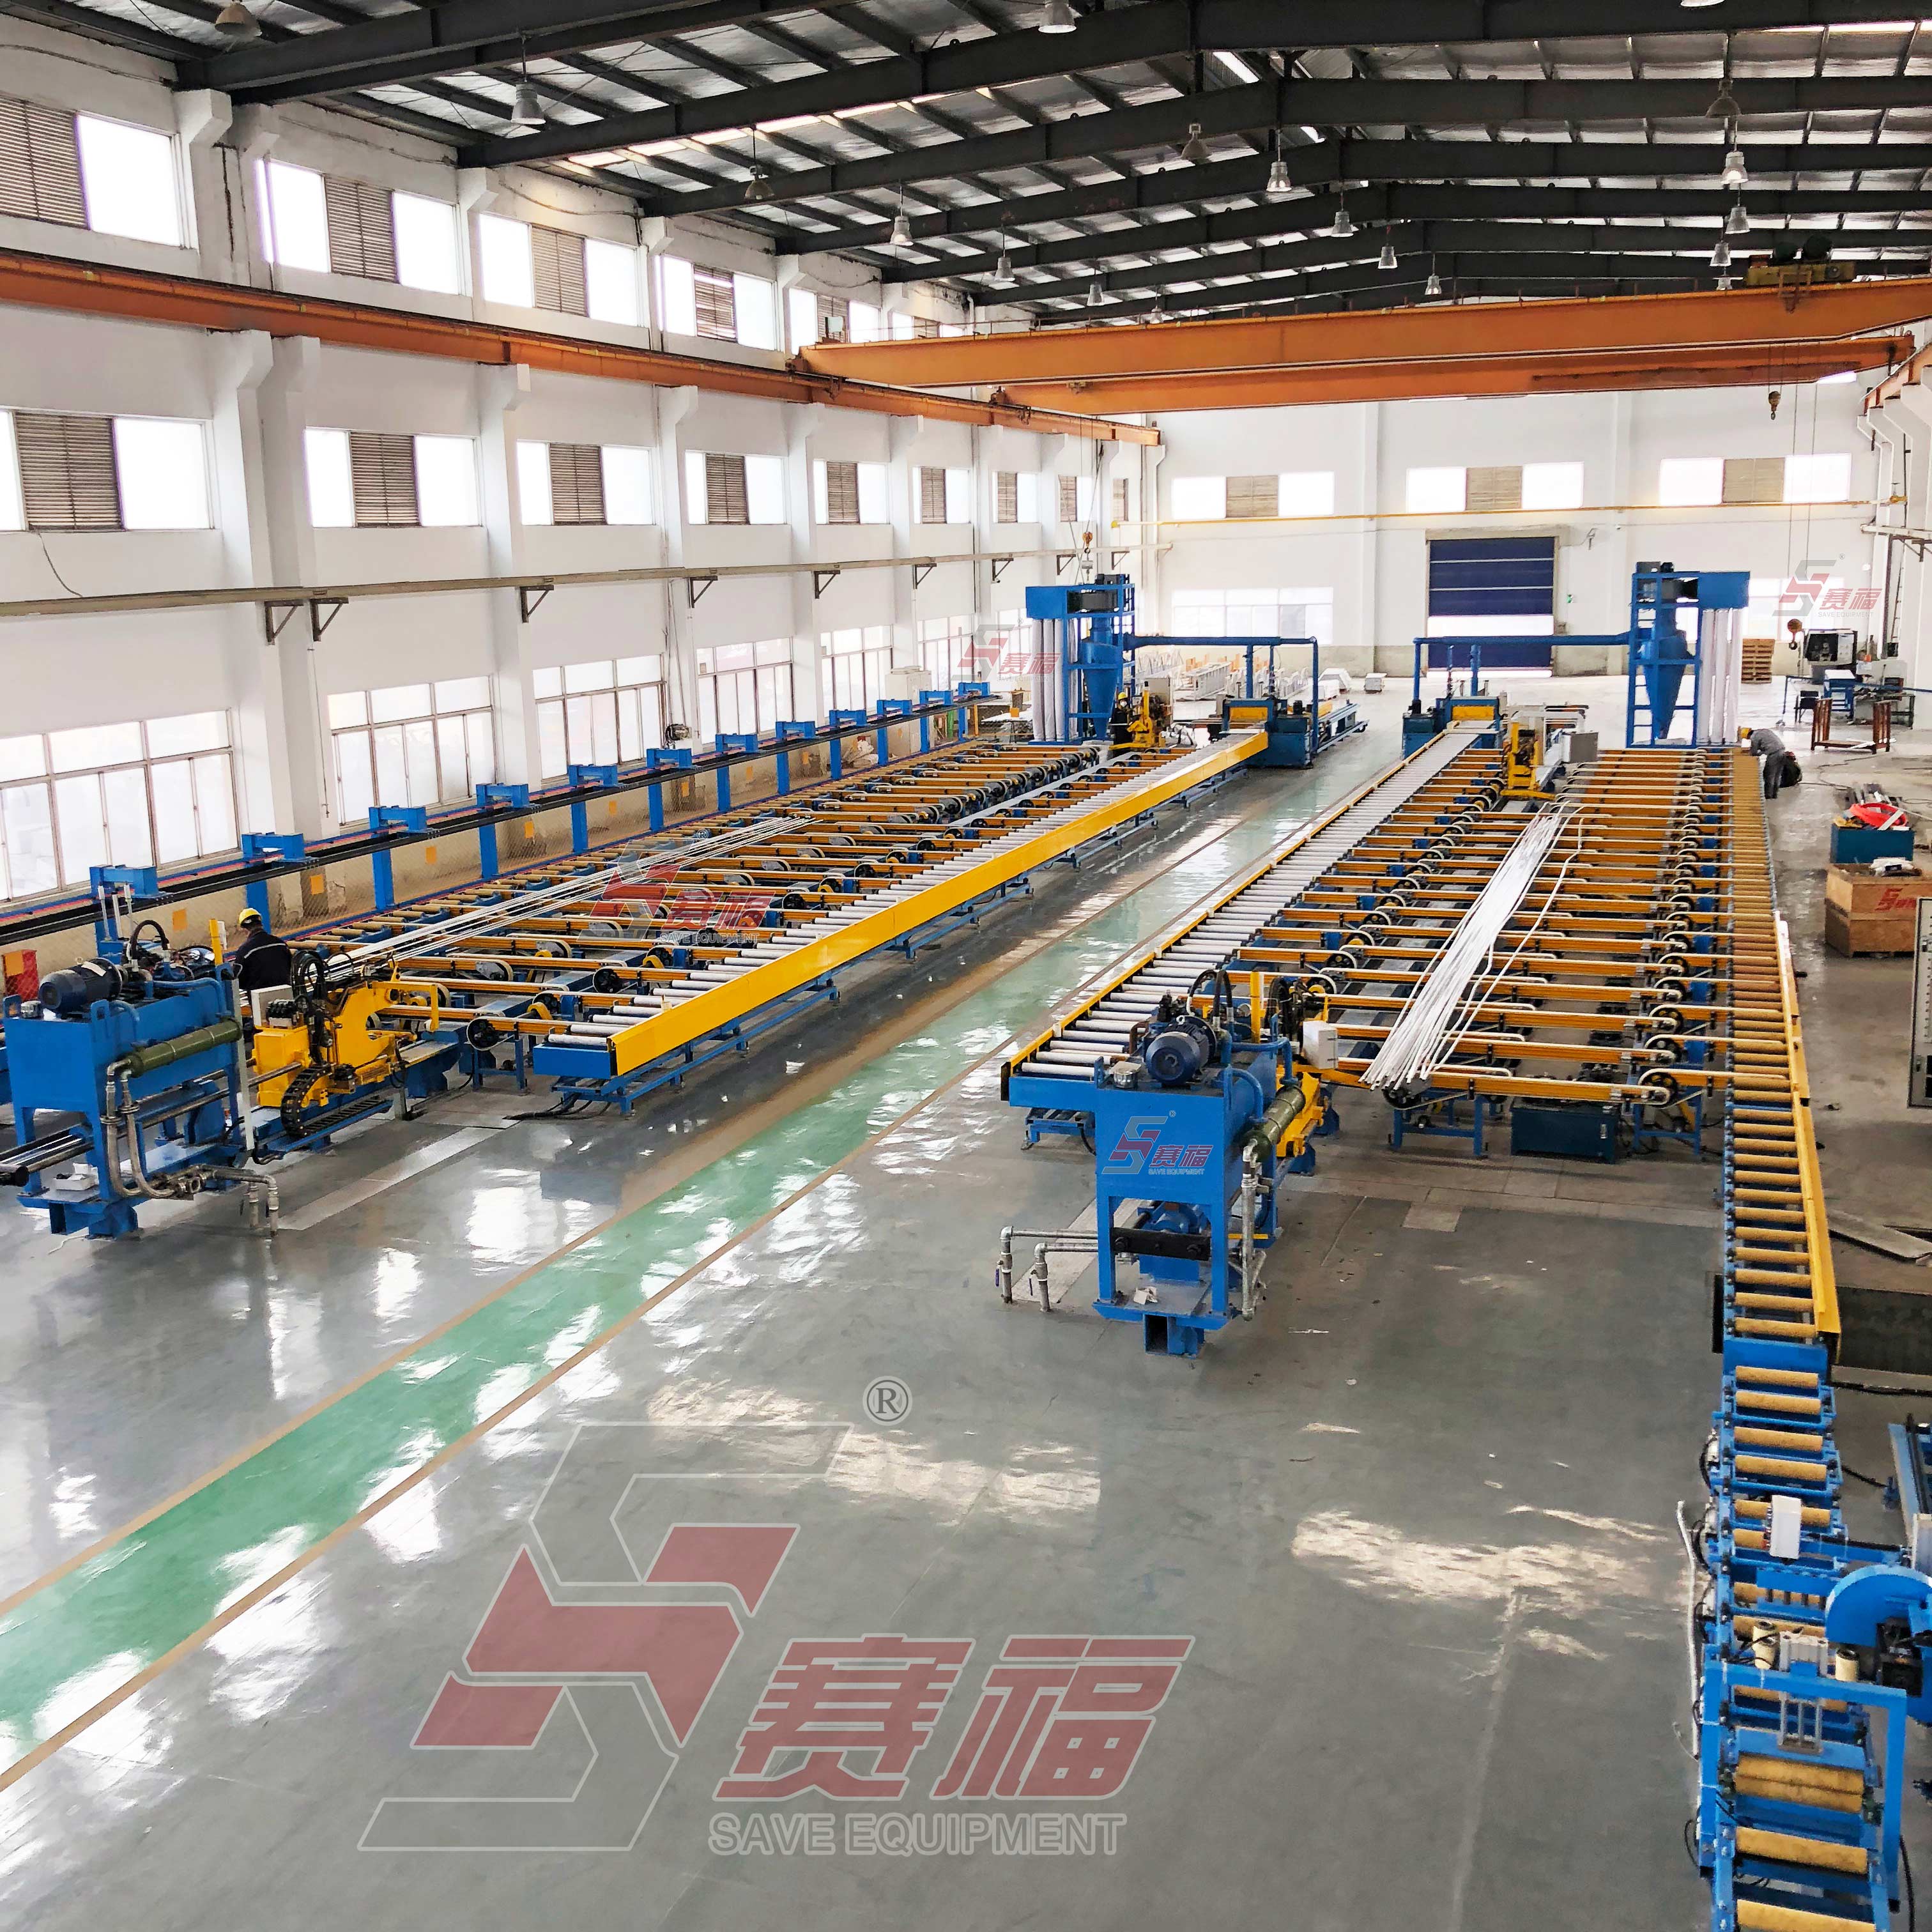 Chengdu Sunshine Aluminum Co., Ltd. - The 4000-ton quenching equipment had been finished installation and starting to pr